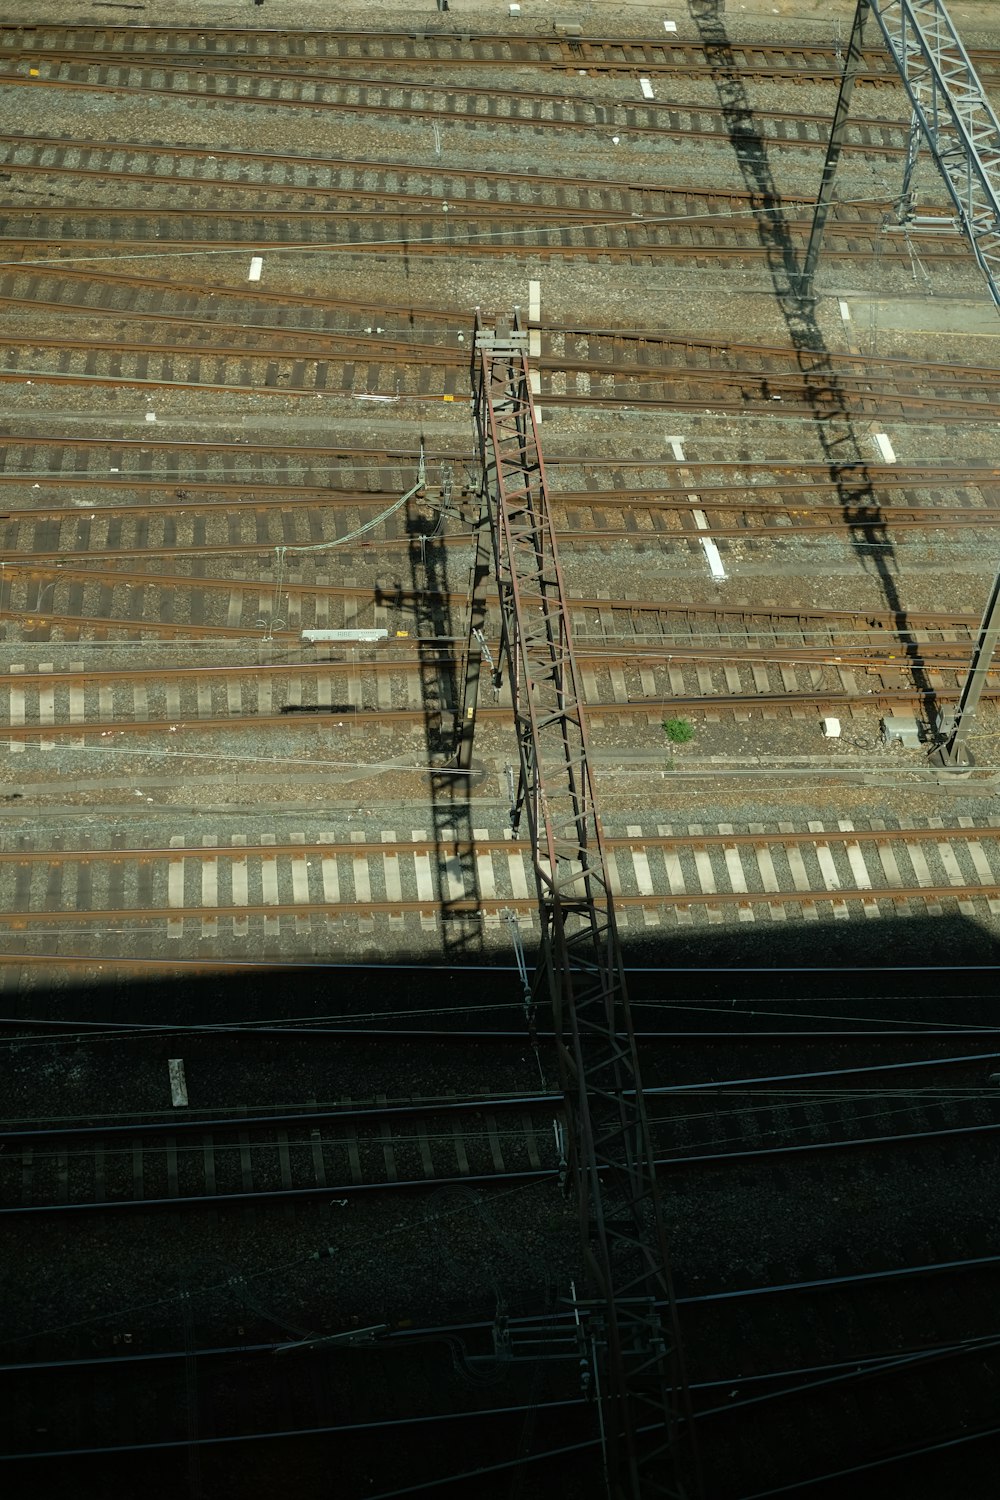 a view of a train track from above